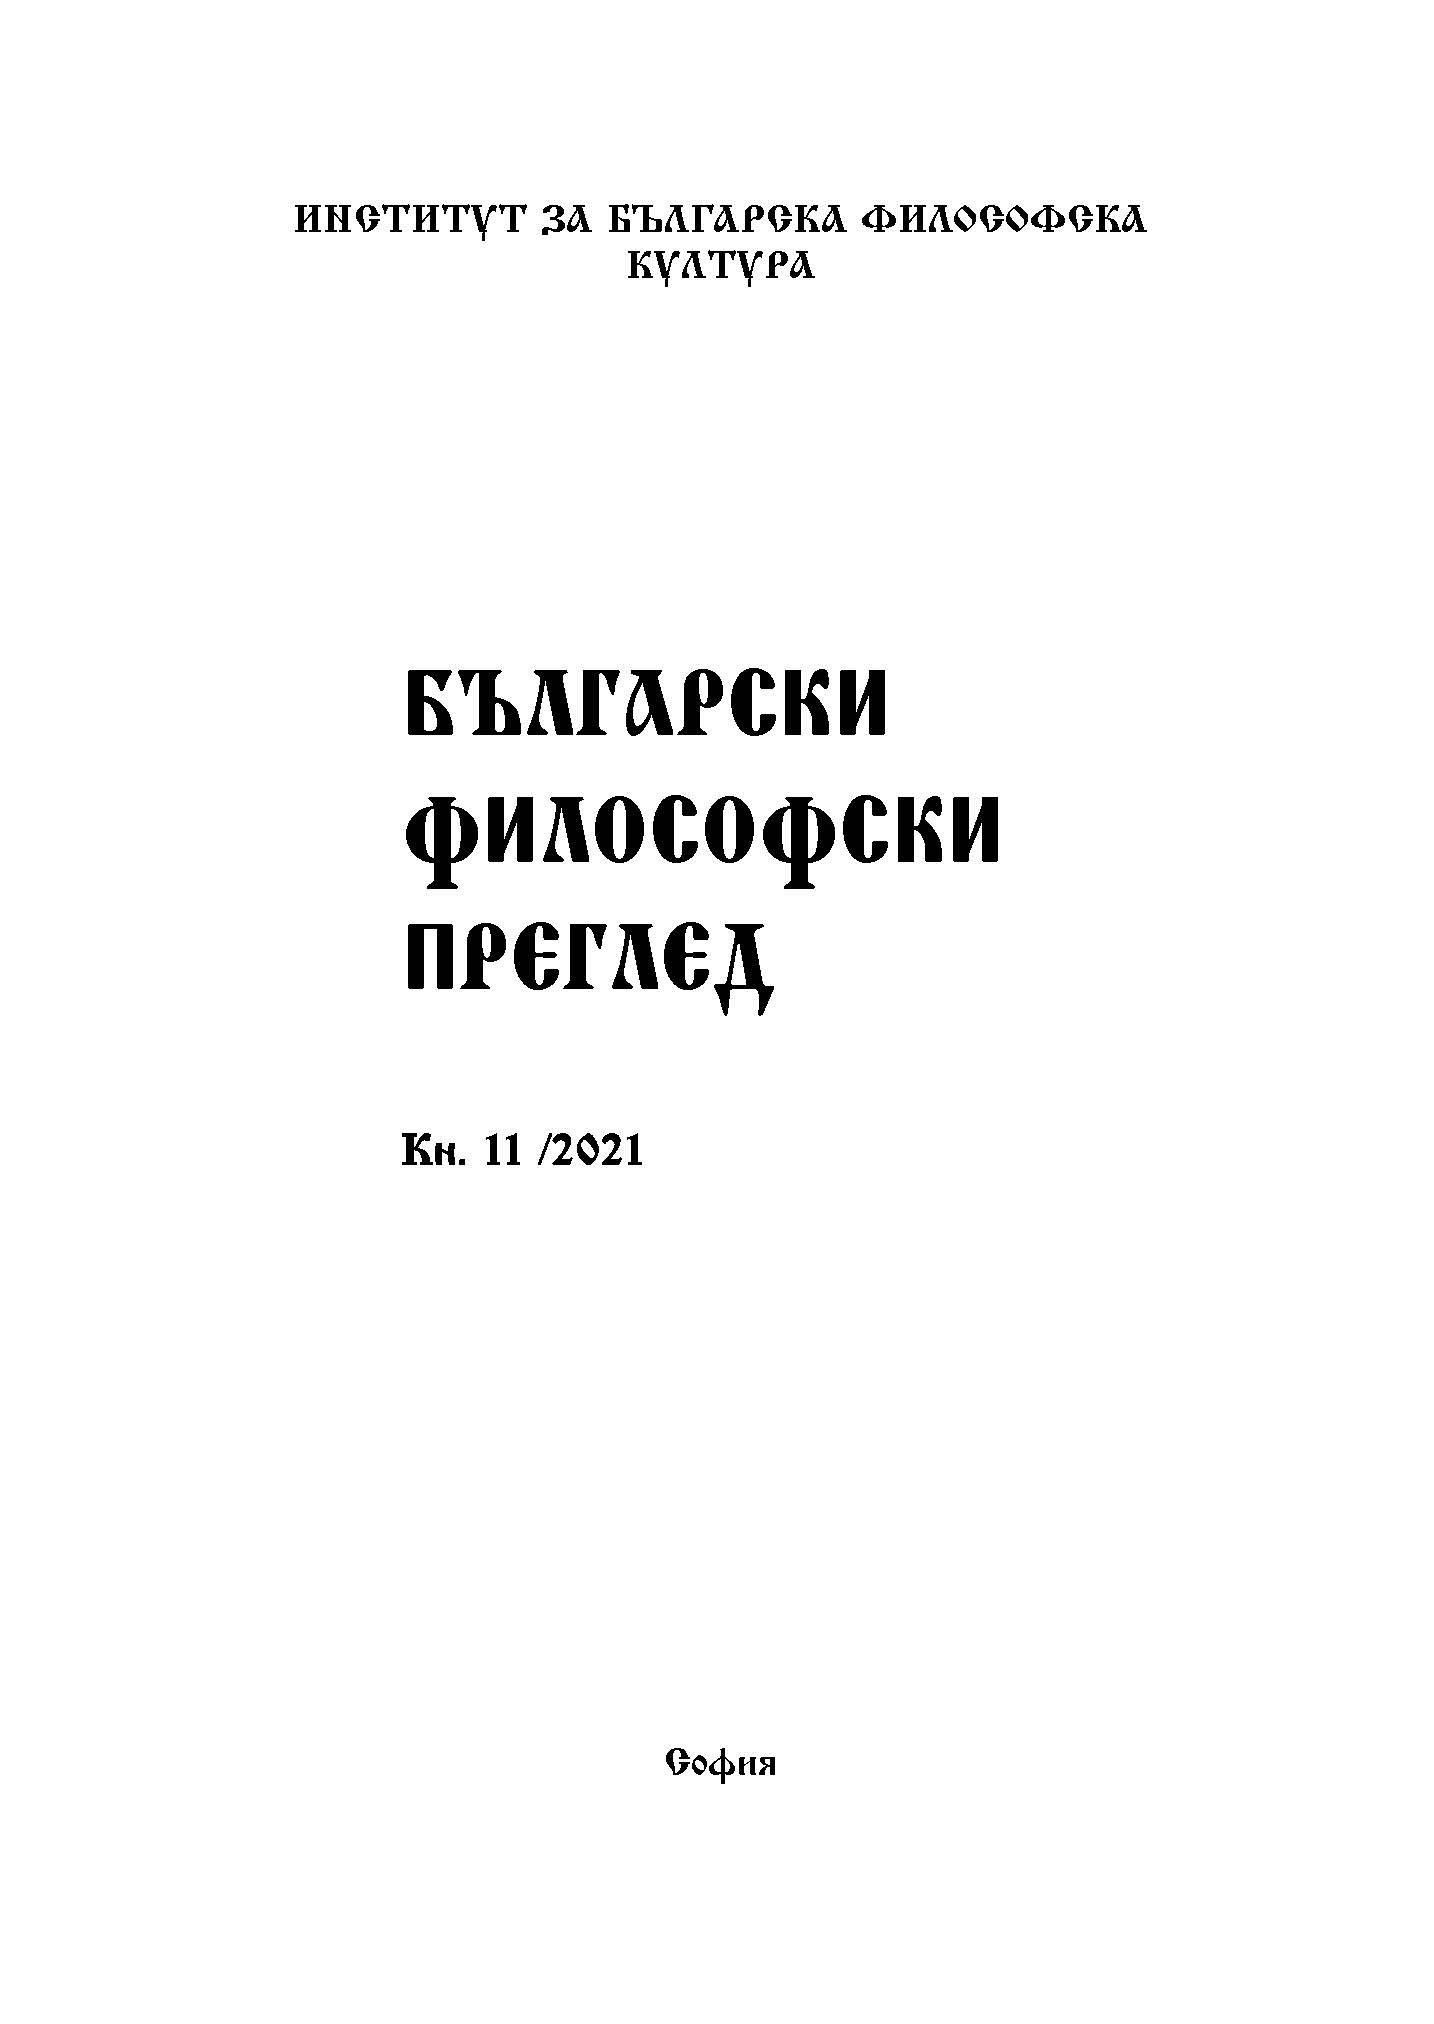 One Failed Essay on the Bulgarian Essayism Cover Image